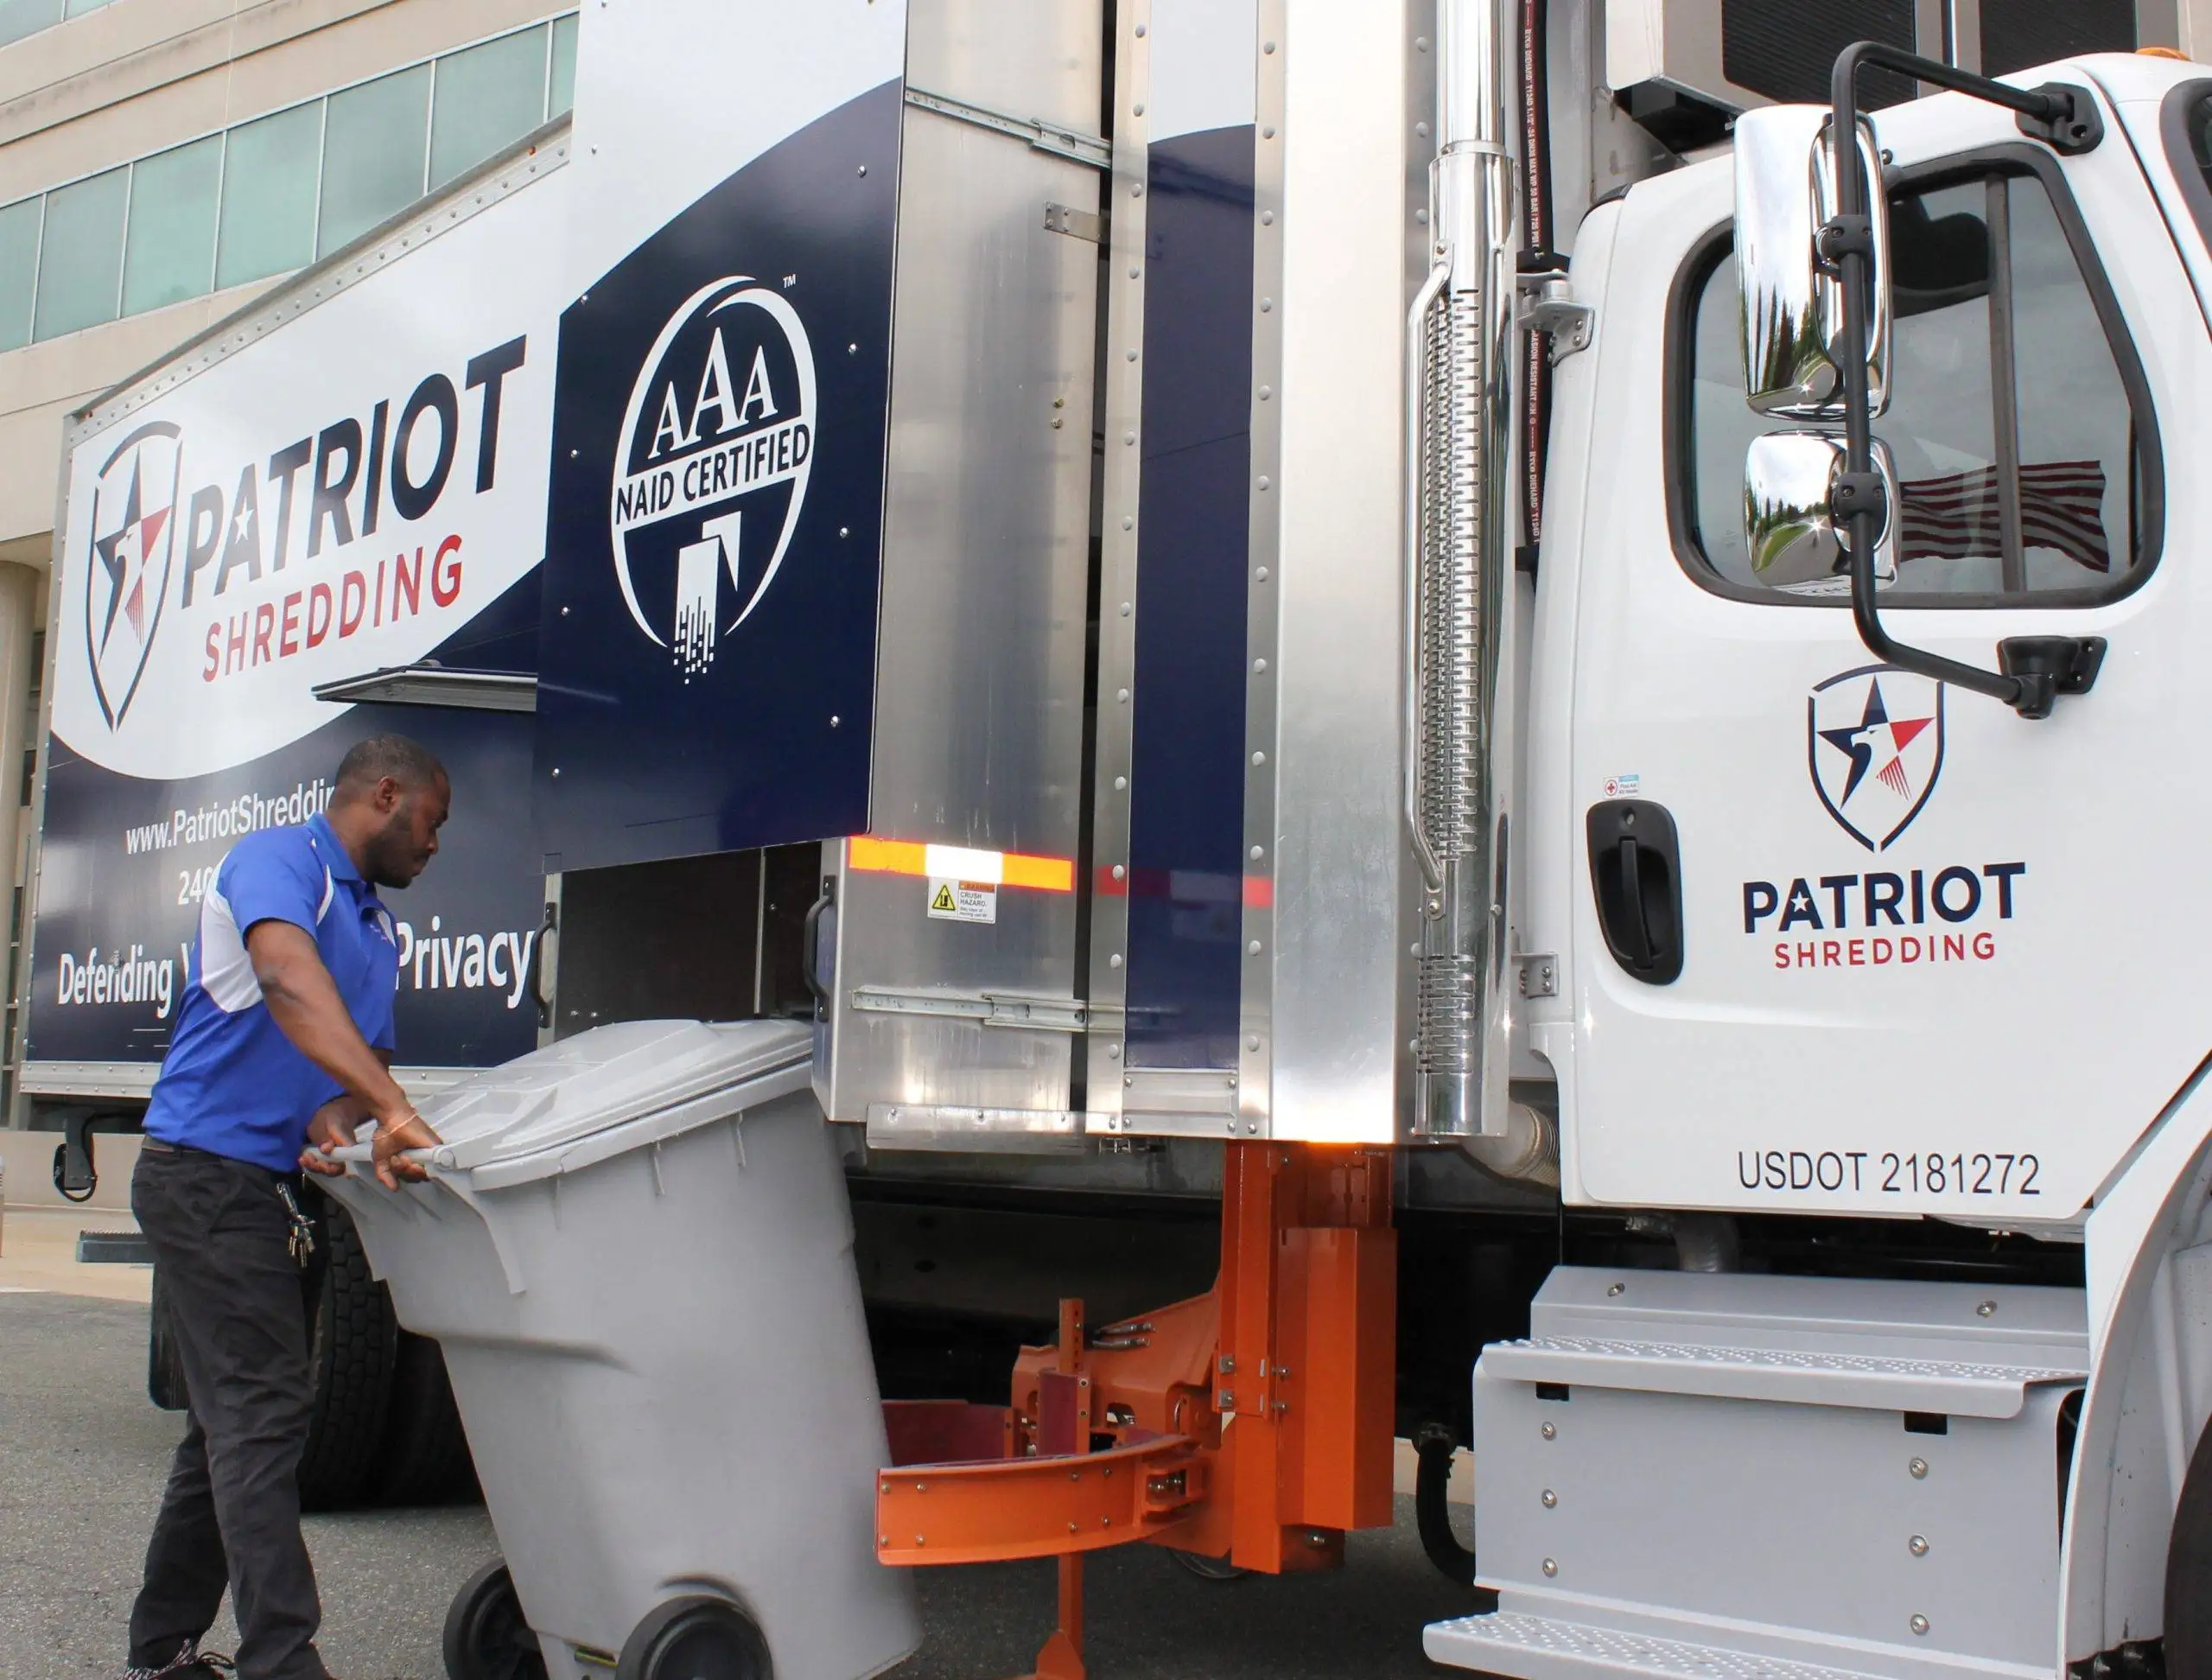 Patriot Shredding Specialists Are Licensed, Bonded, & Insured Professionals Who Operate Under Our NAID AAA Certification